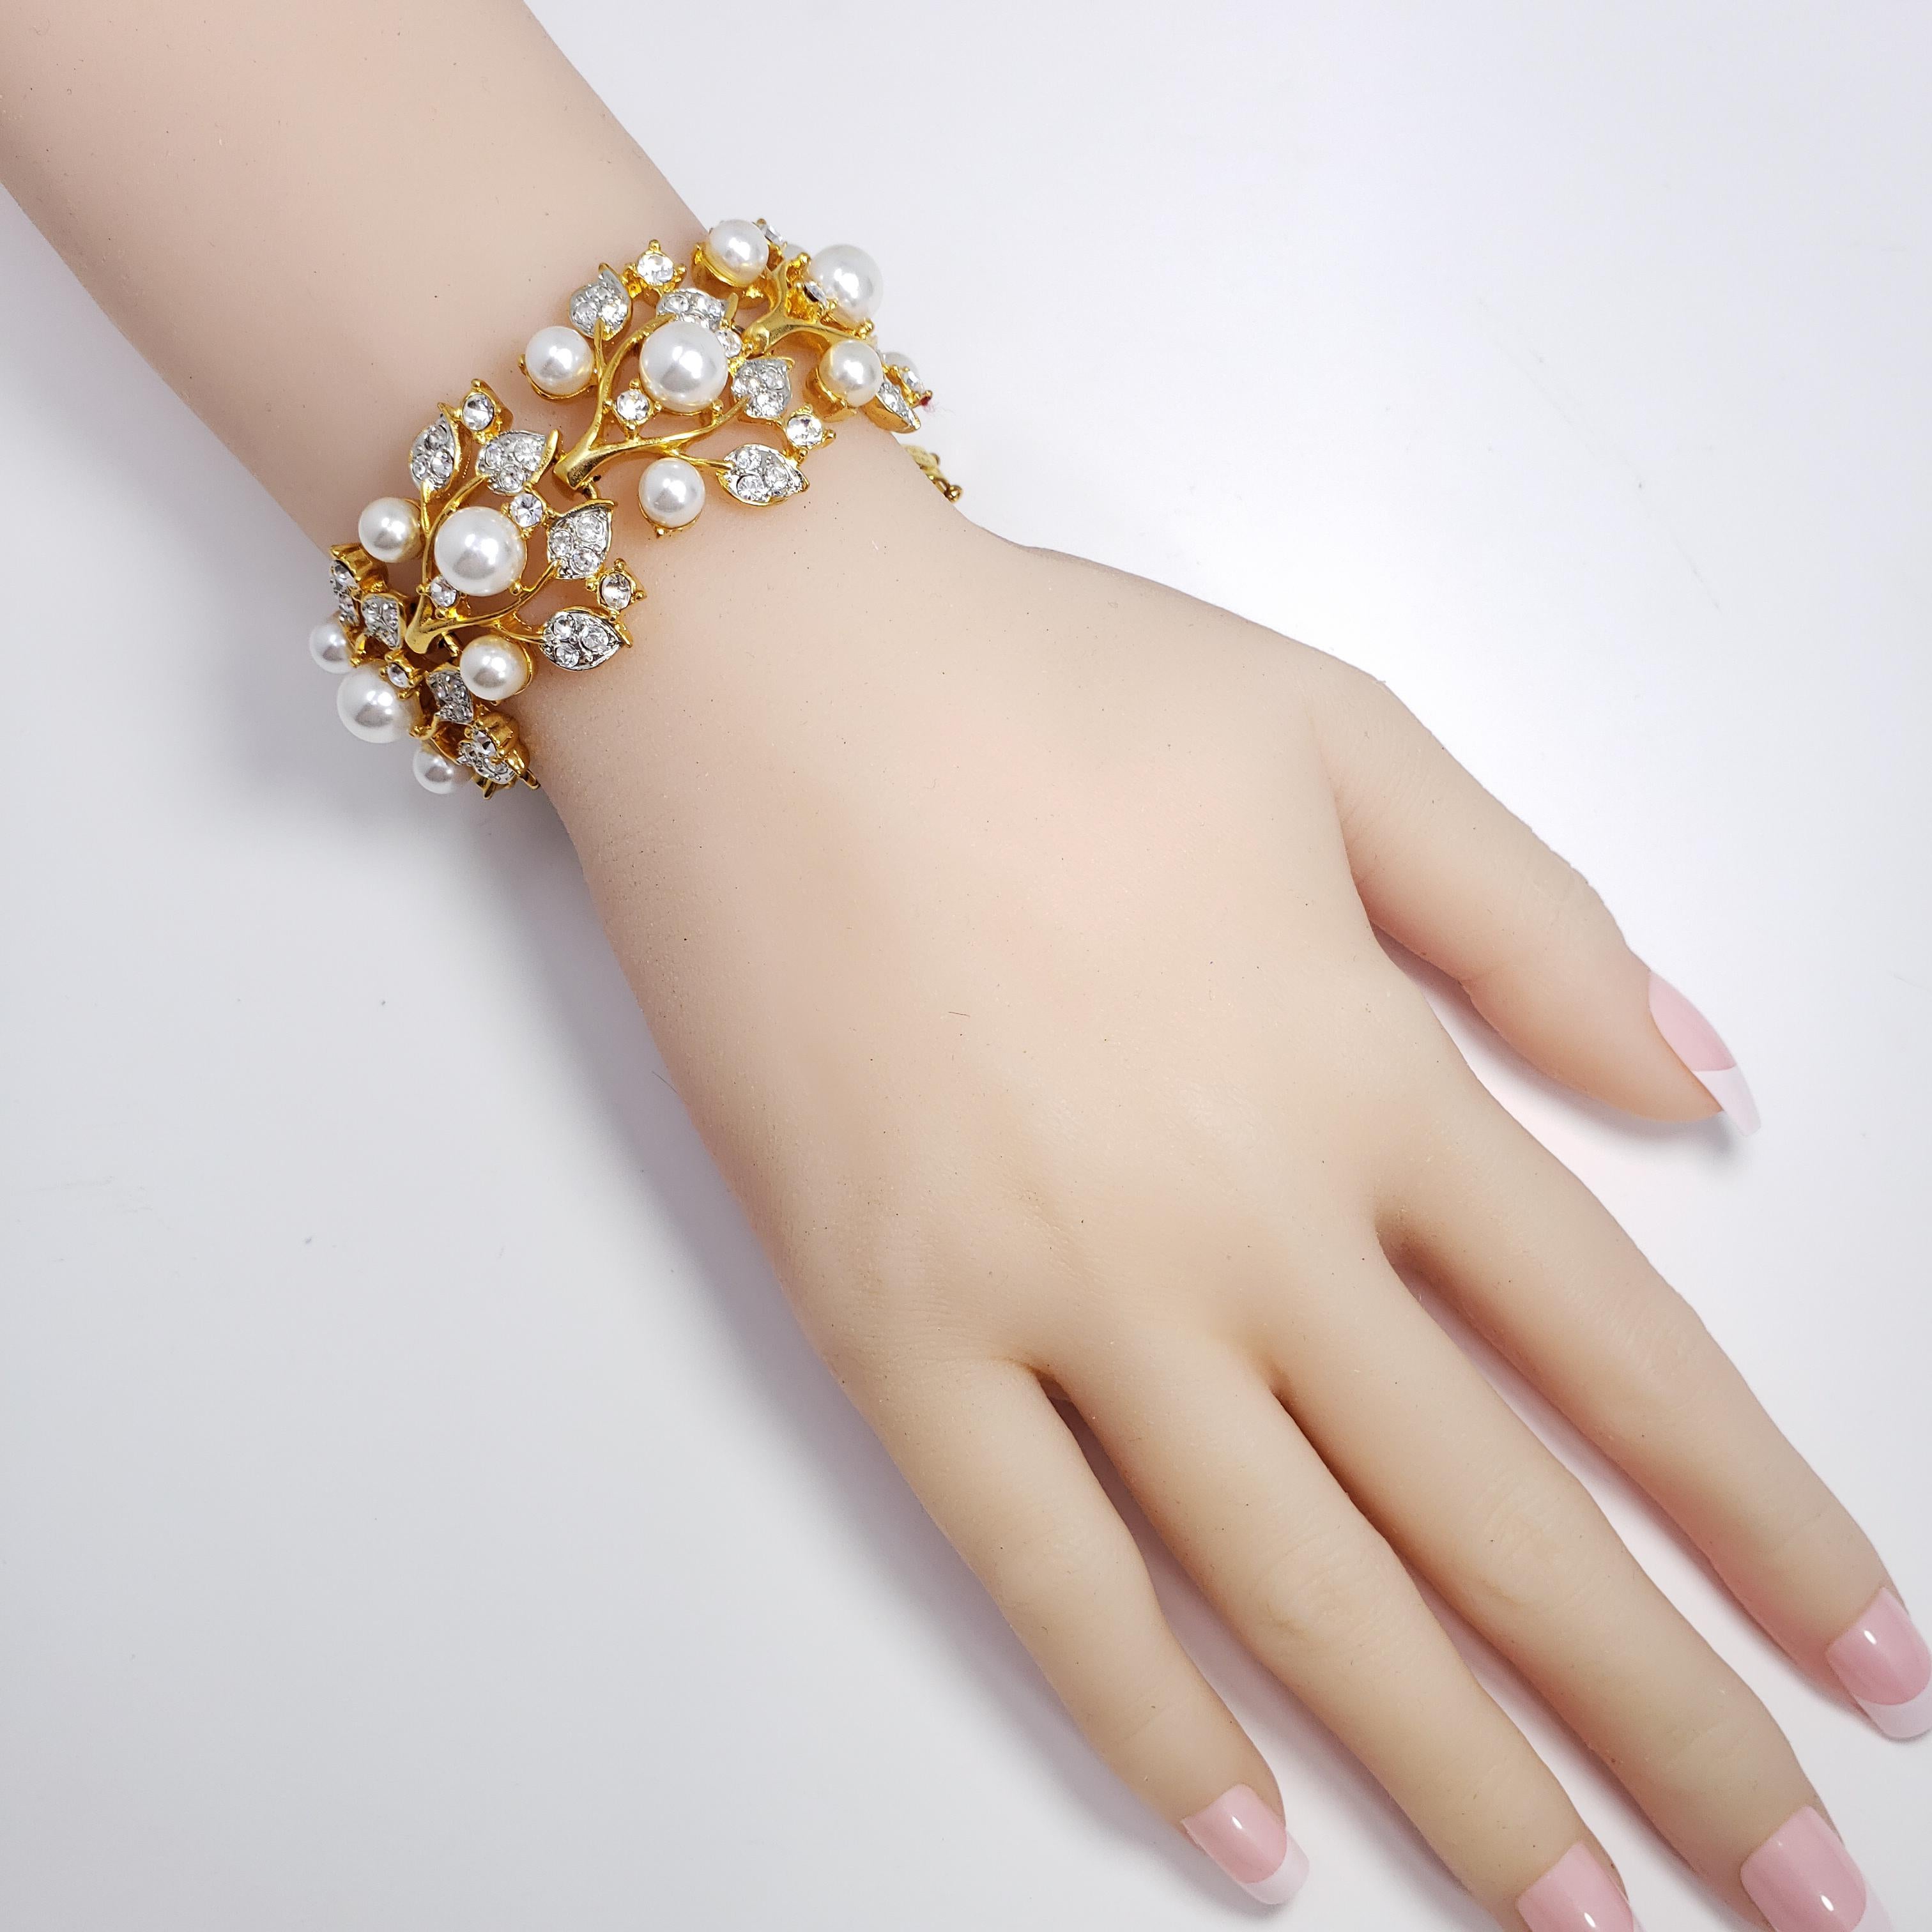 A stylish floral themed bracelet by Kenneth Jay Lane. This link bracelet features flowing, gold-tone leaf and branch motifs, accented with glass pearls and clear crystals. 

Hallmarks: Kenneth © Lane, Made in USA